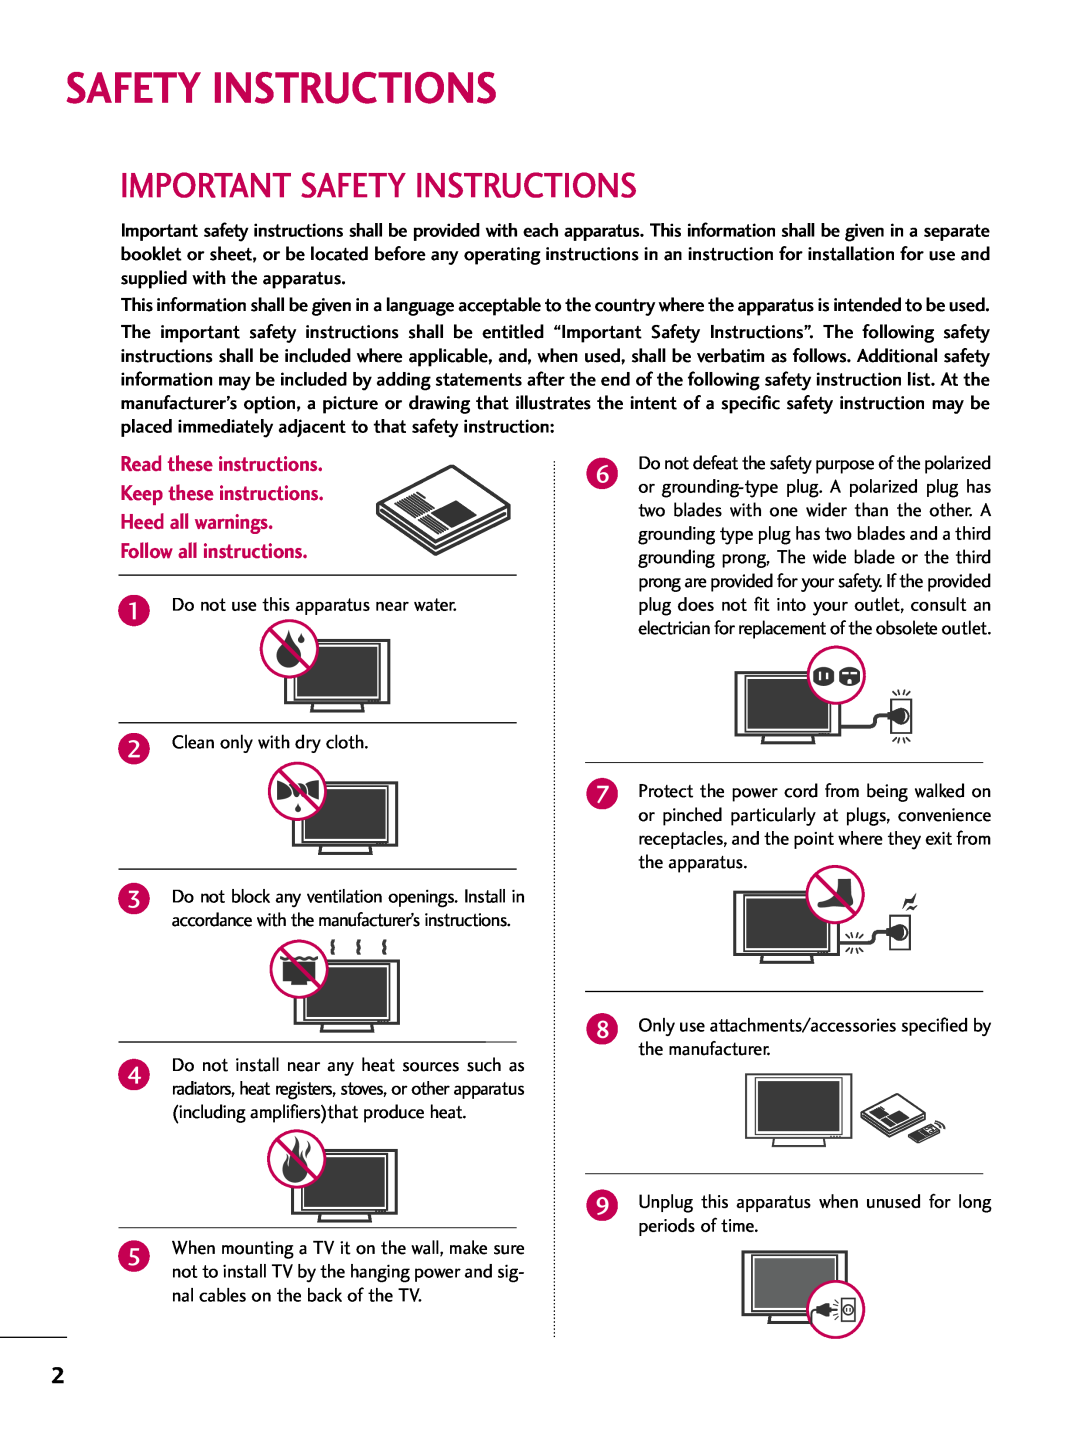 LG Electronics 4770 Important Safety Instructions, Read these instructions Keep these instructions Heed all warnings 